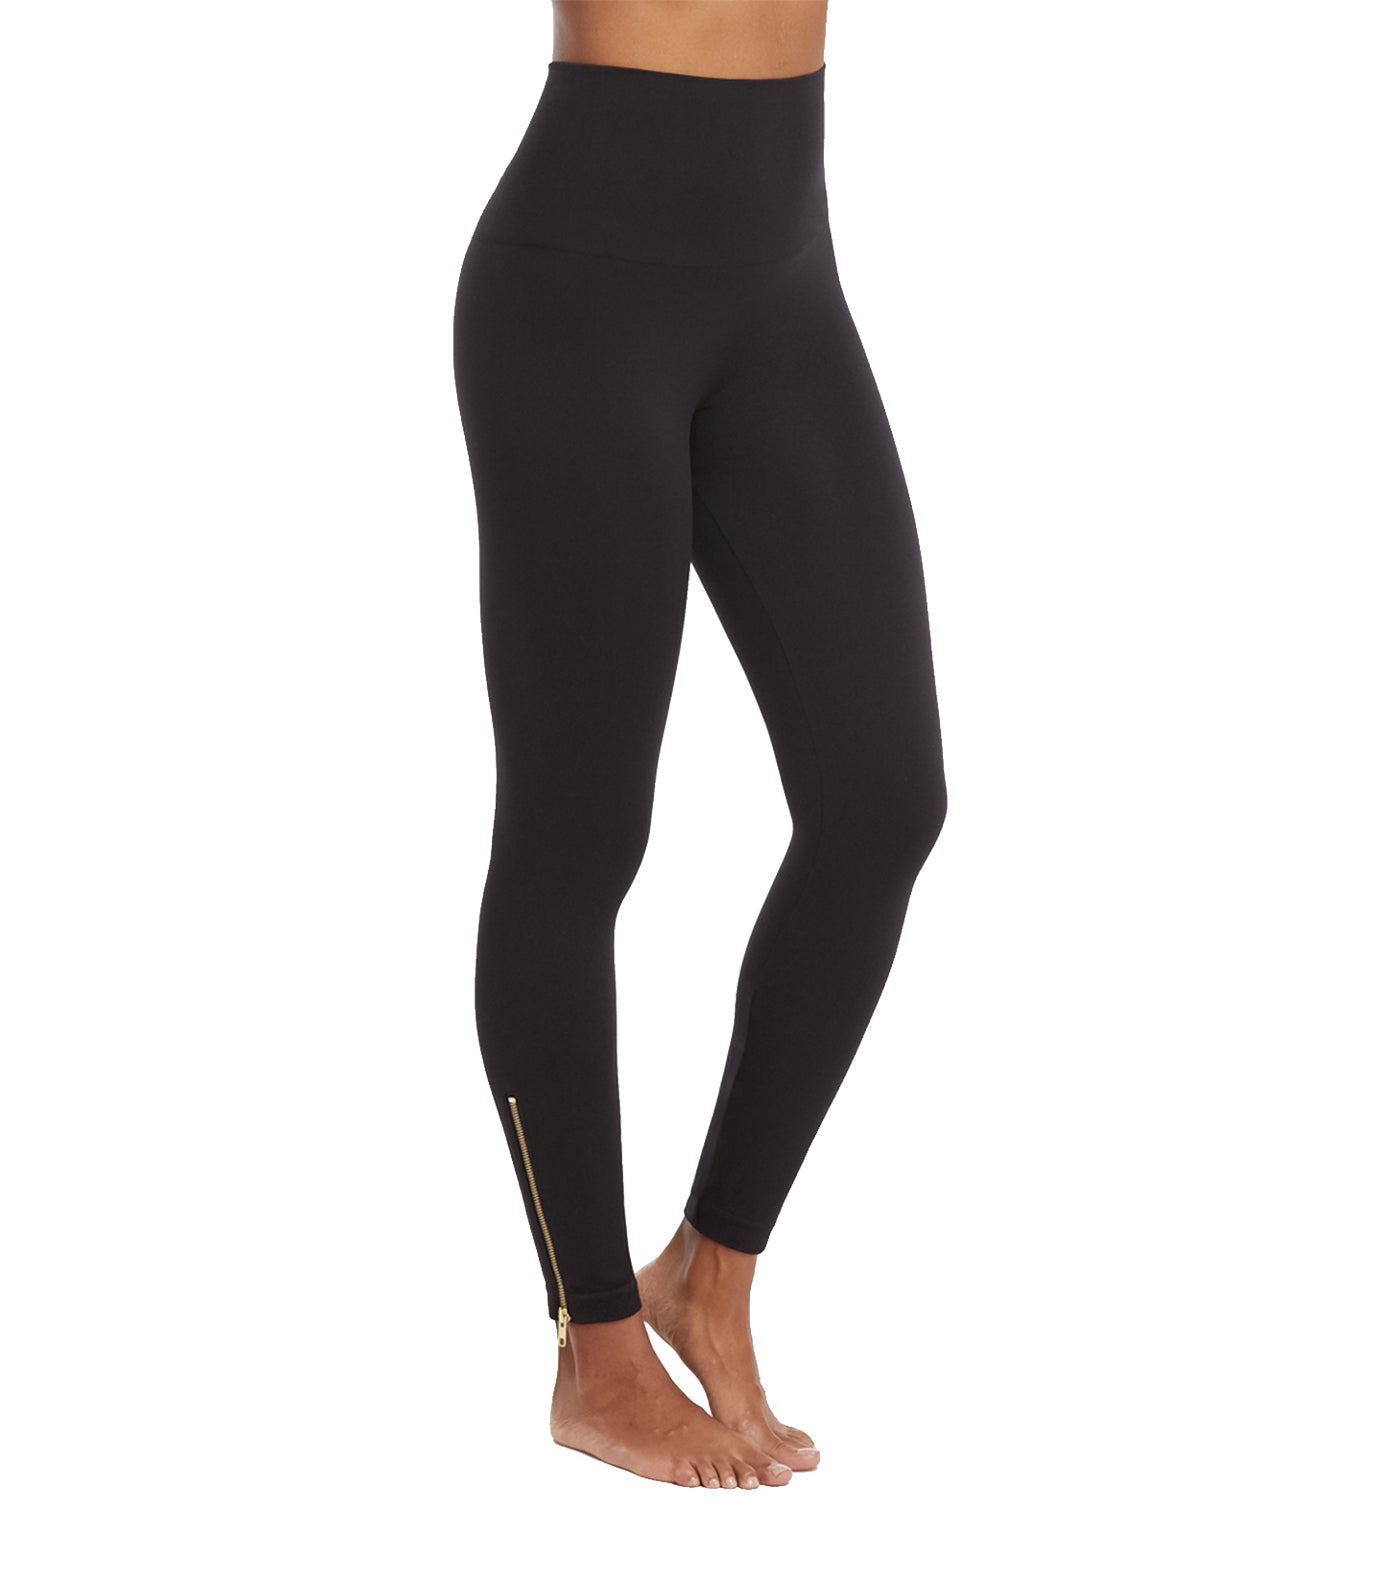 Spanx Women's Black Look At Me Now Seamless Side Zip Leggings Size Small -  $43 - From Francisco